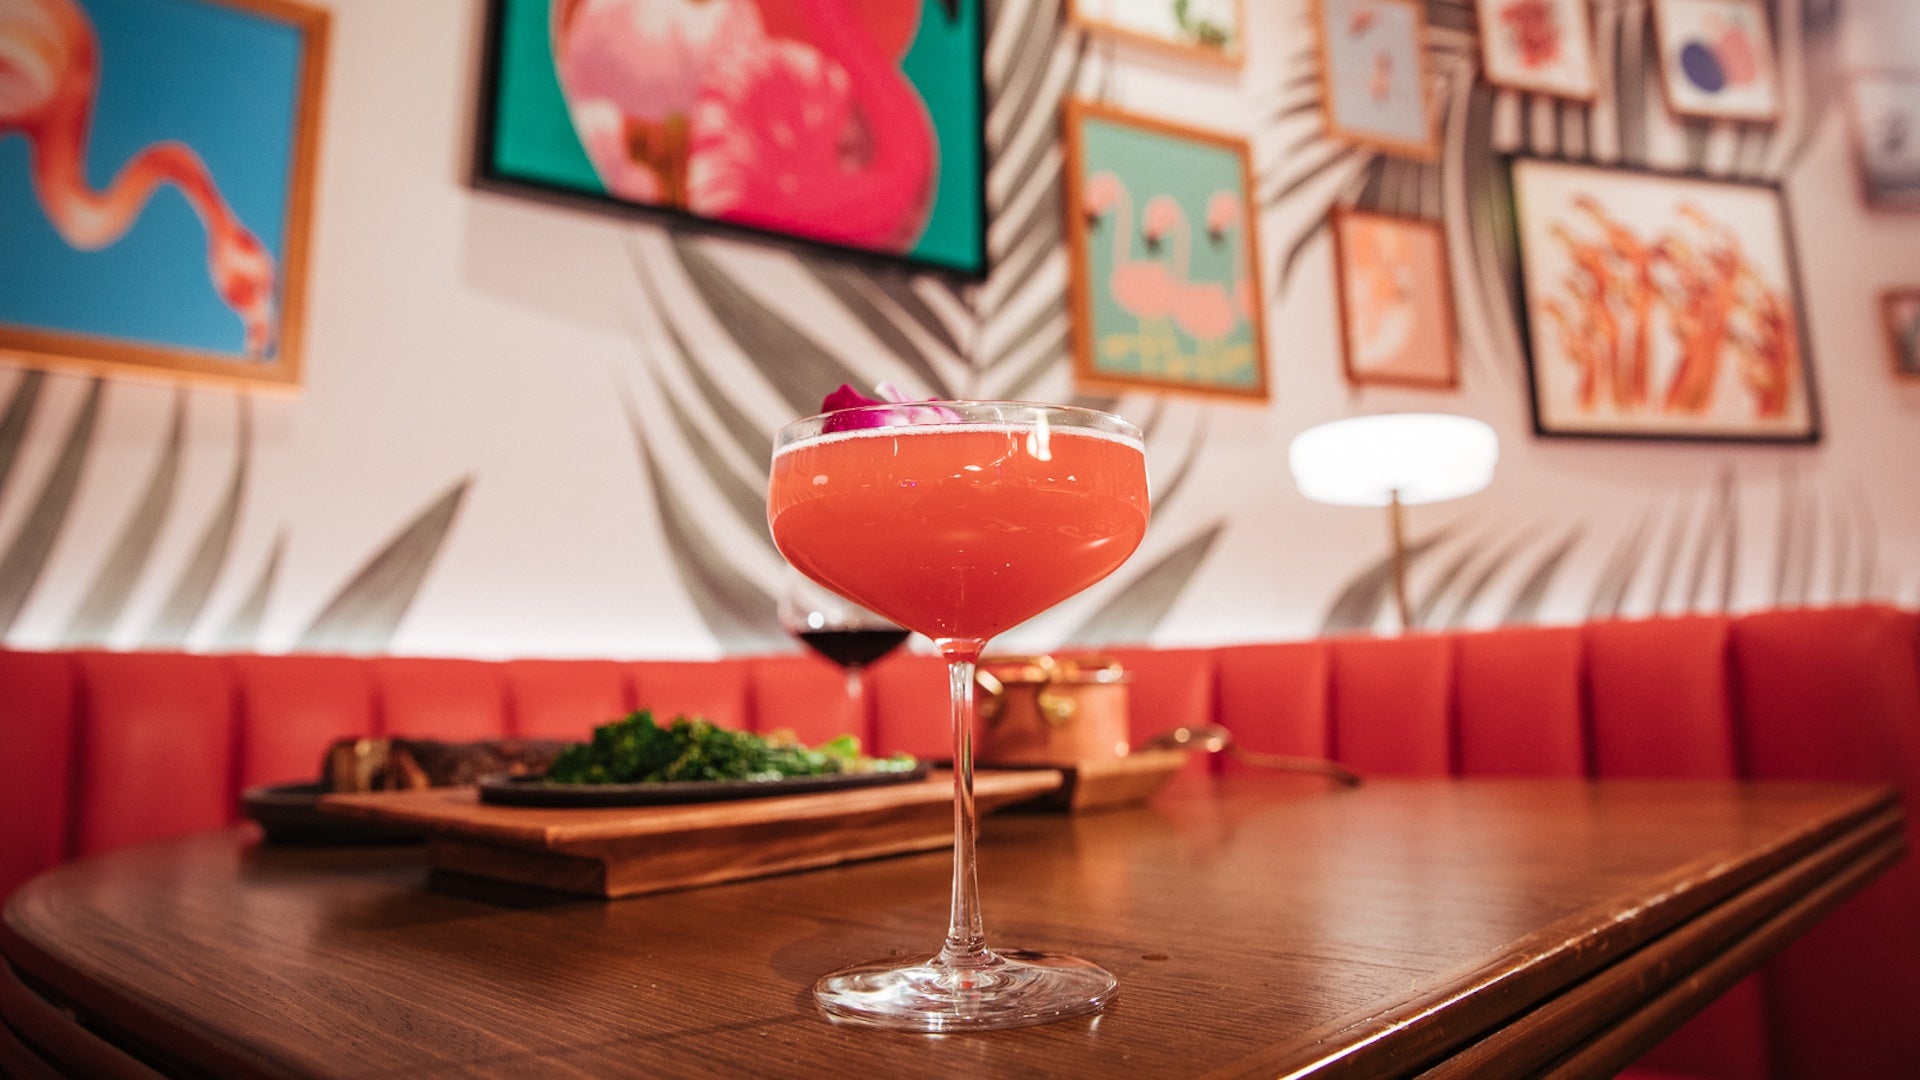 Pink cocktail sitting on a table with tropical wallpaper and flamingo art on the walls in the background